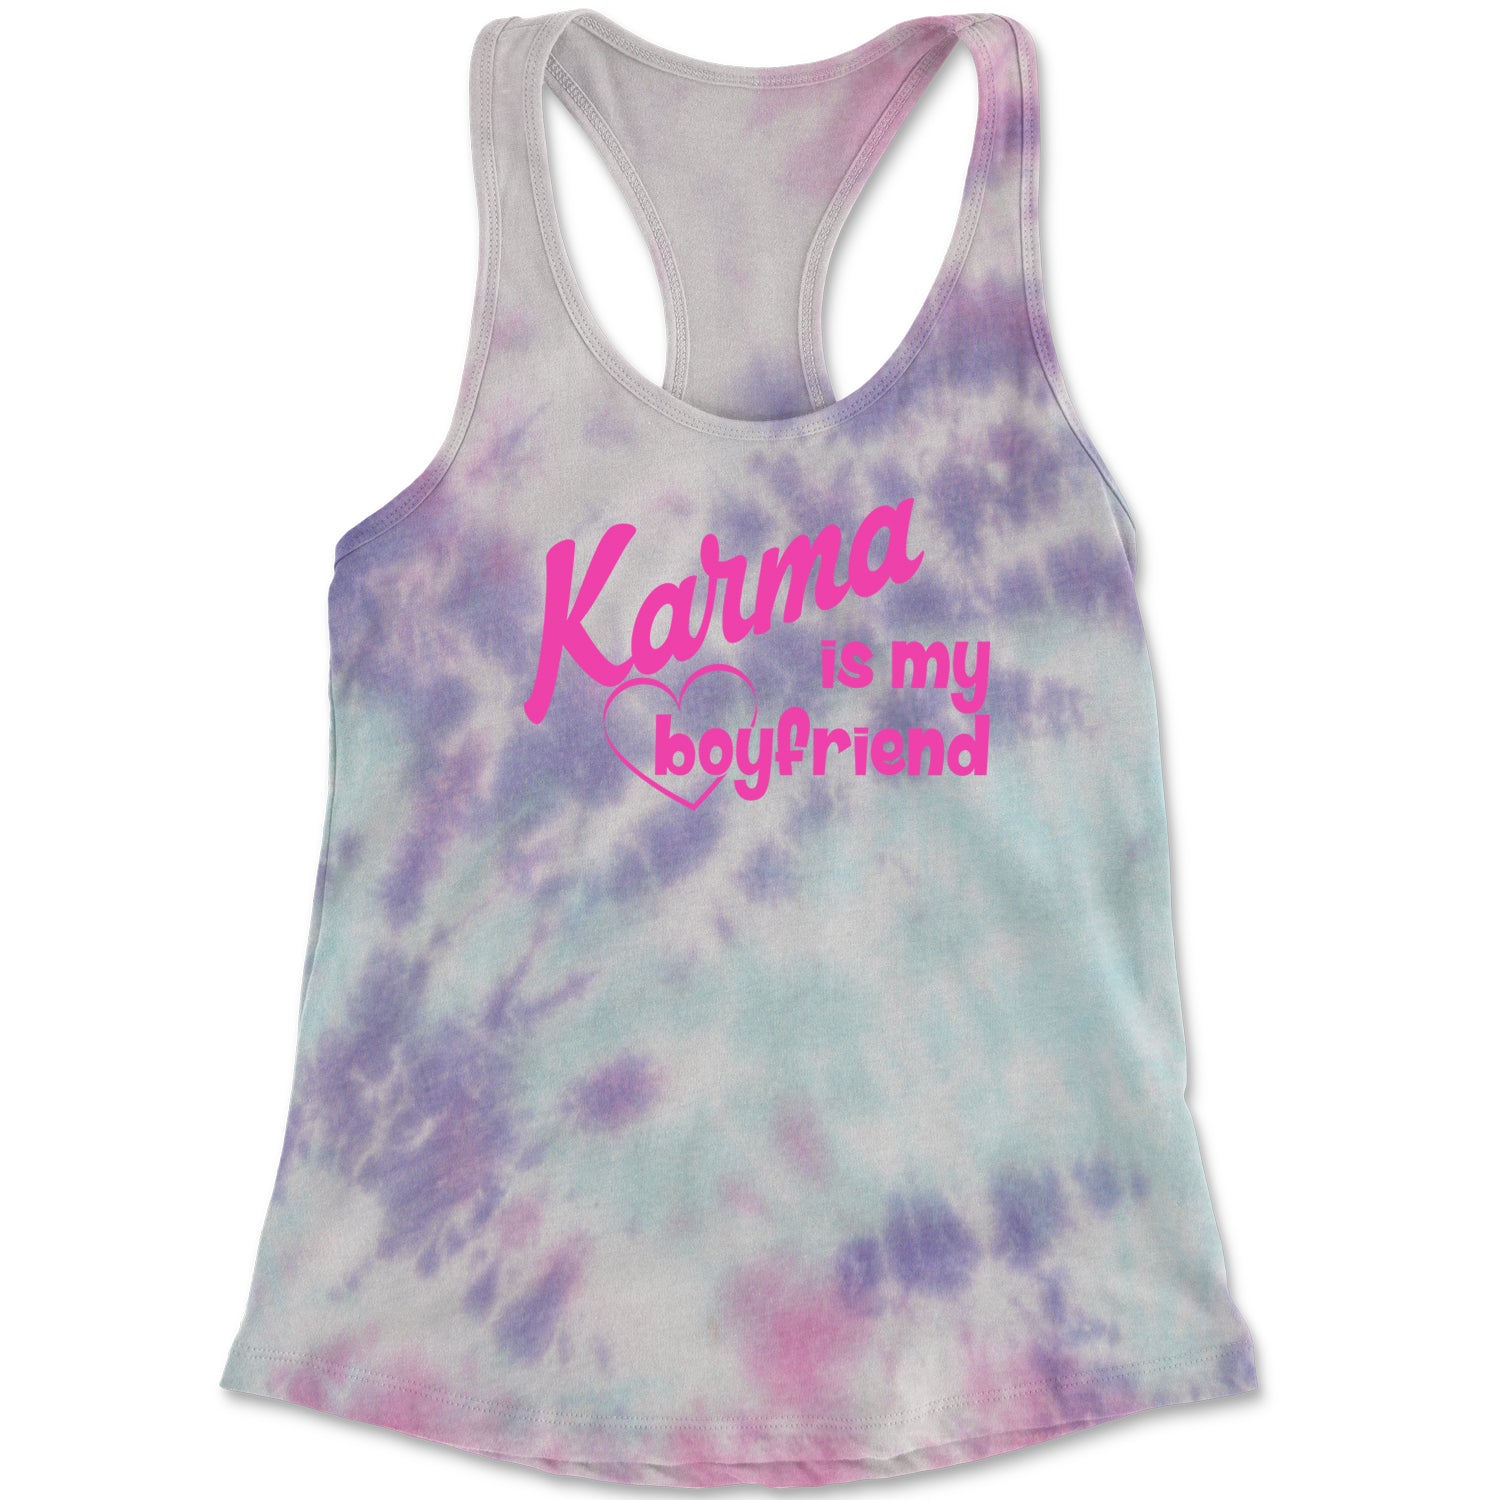 Karma Is My Boyfriend Racerback Tank Top for Women nation, taylornation by Expression Tees